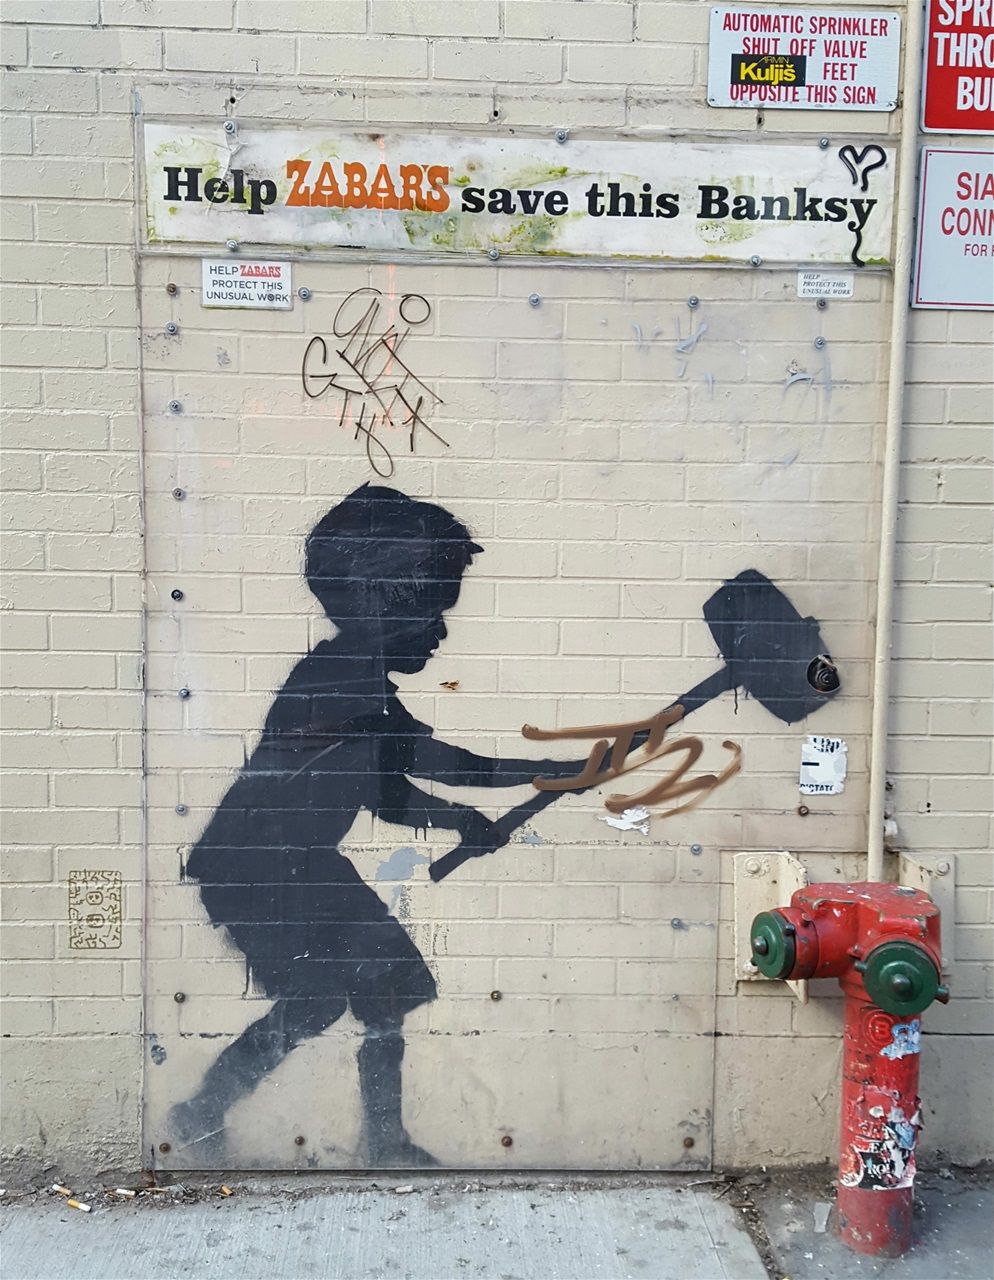 The only Banksy mural in Upper West Side.  Zabar's took the initiative (and the cost) to protect this piece of street art.